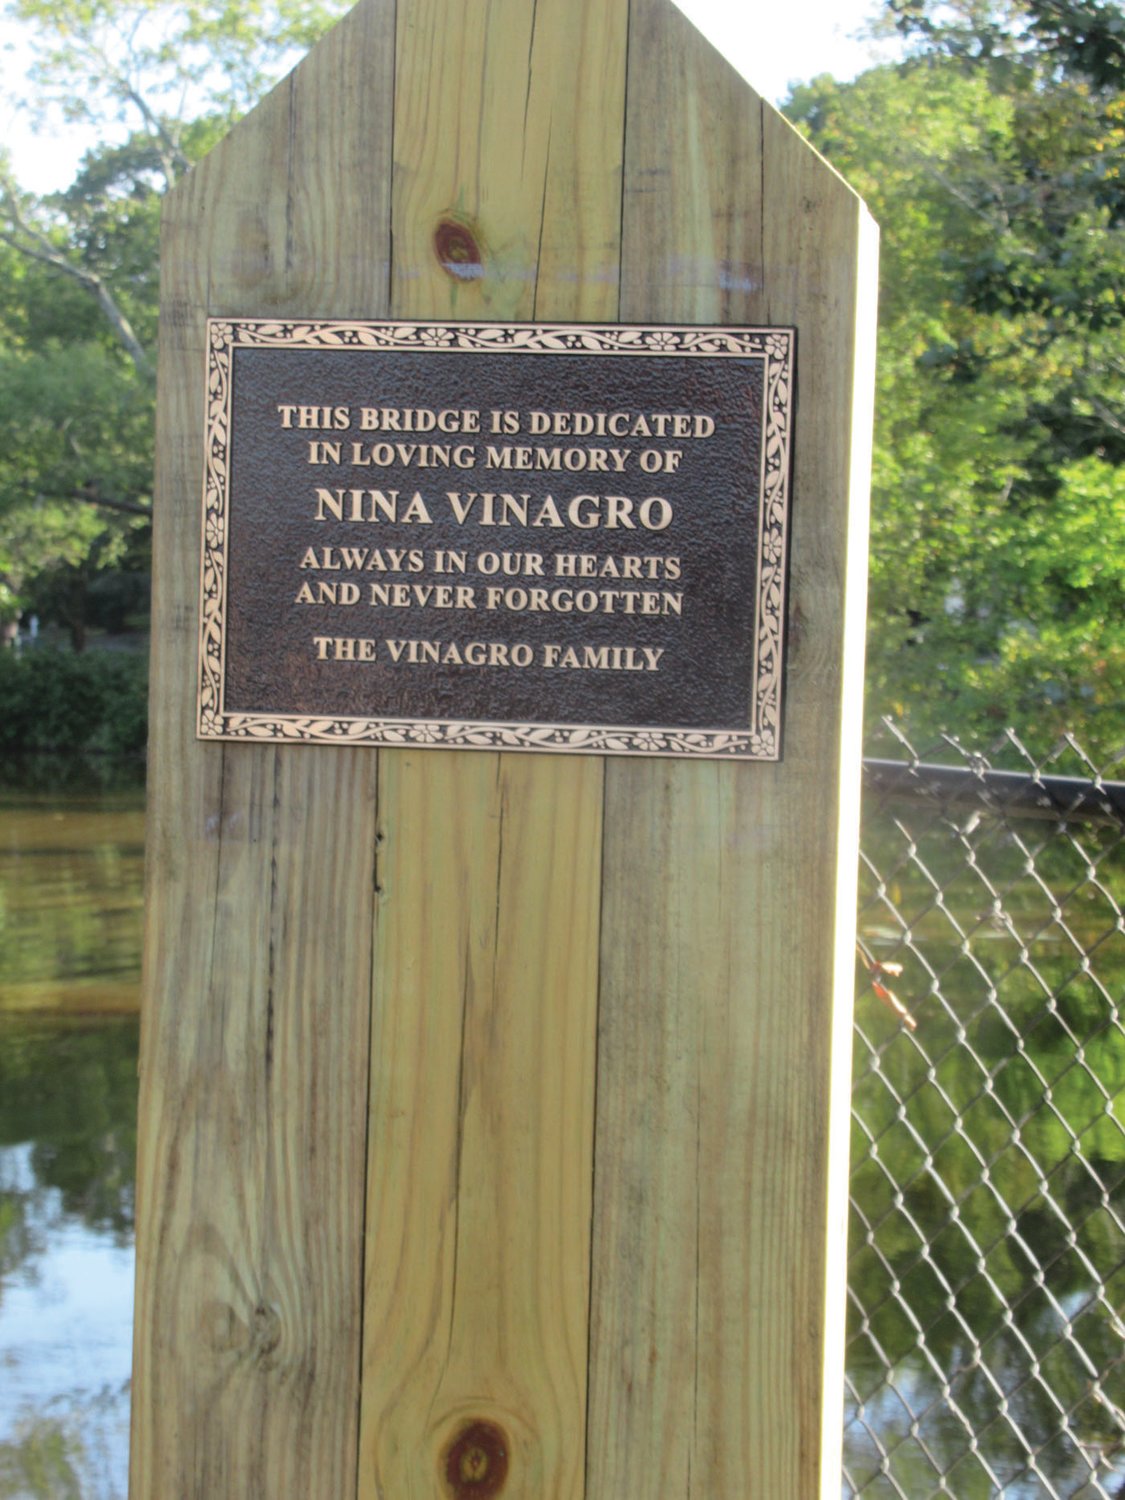 MIGHTY MESSAGE: This is the bronze plaque that was unveiled Saturday morning in honor of the late Nina Vinagro, for whom the new footbridge inside War Memorial Park is named.